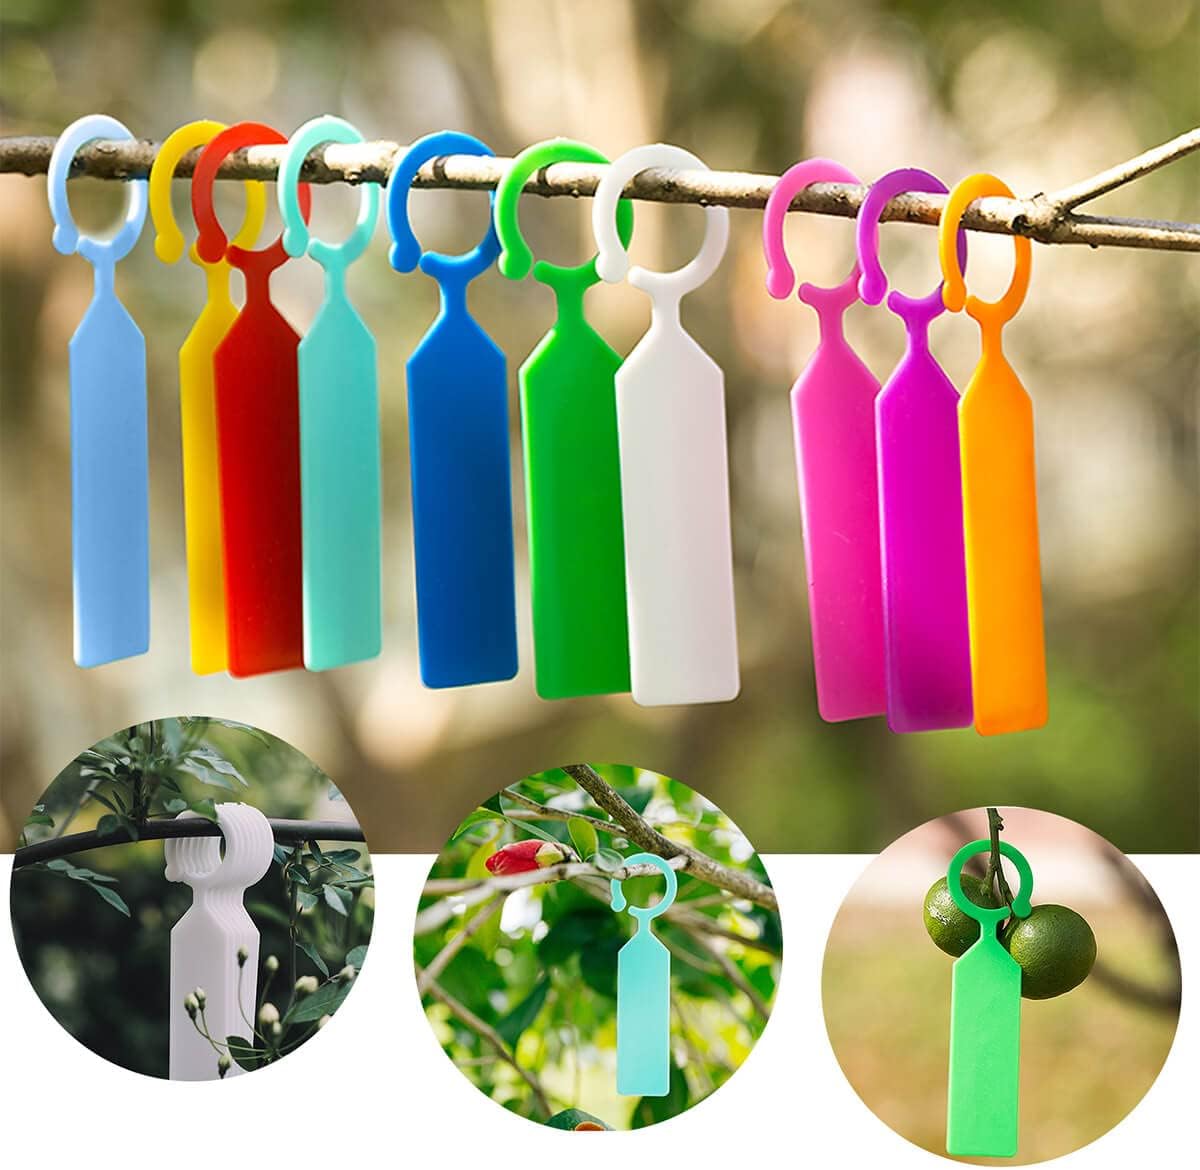 MHY 400 Pcs Thick Plastic Plant Labels - Garden Waterproof Plant Tree Tags - 4.3 inch Color Hanging Plant Markers for Plants, Potted Plants, Nurseries, Trees，Gardening : Patio, Lawn  Garden